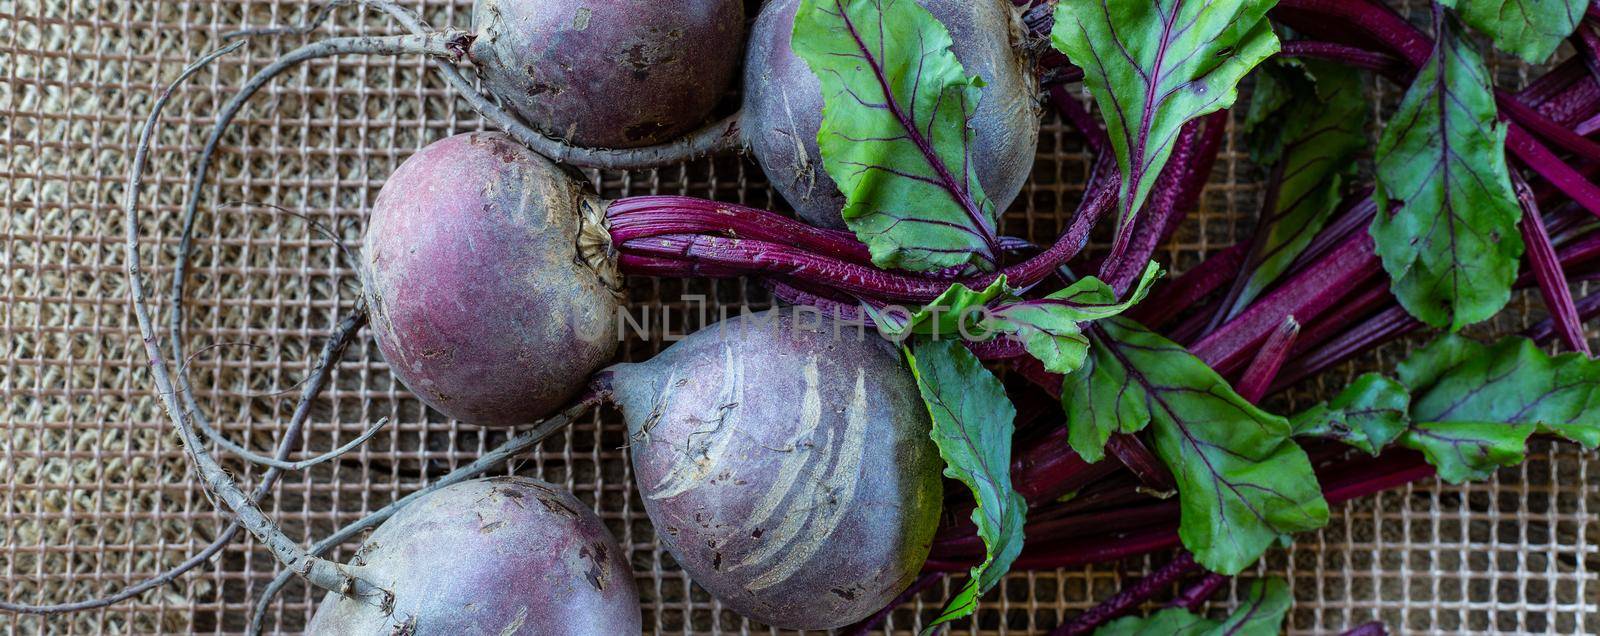 Beetroot vegetables. Horizontal flat lay on rustic kitchen with canvas bag